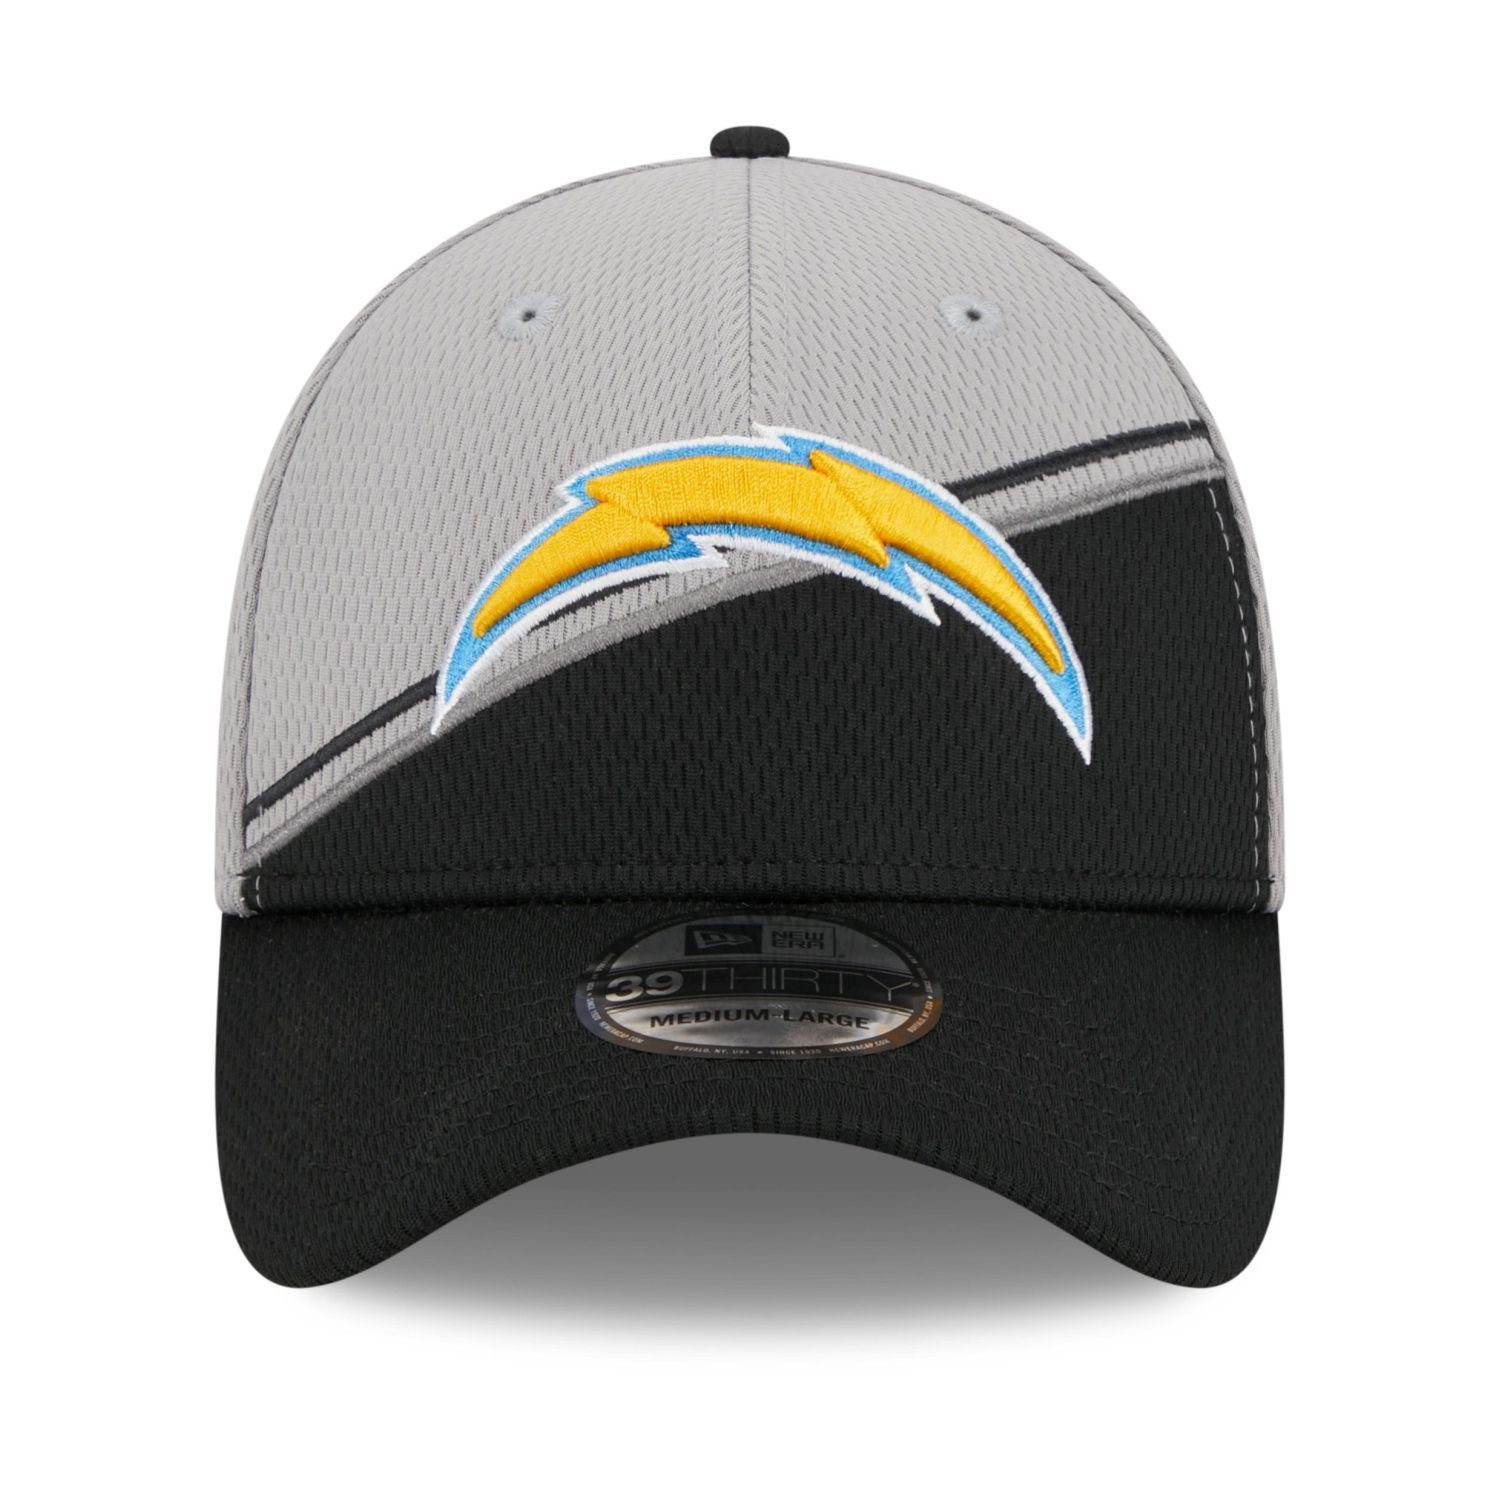 New Angeles Los Flex Chargers Cap Era 2023 SIDELINE 39Thirty